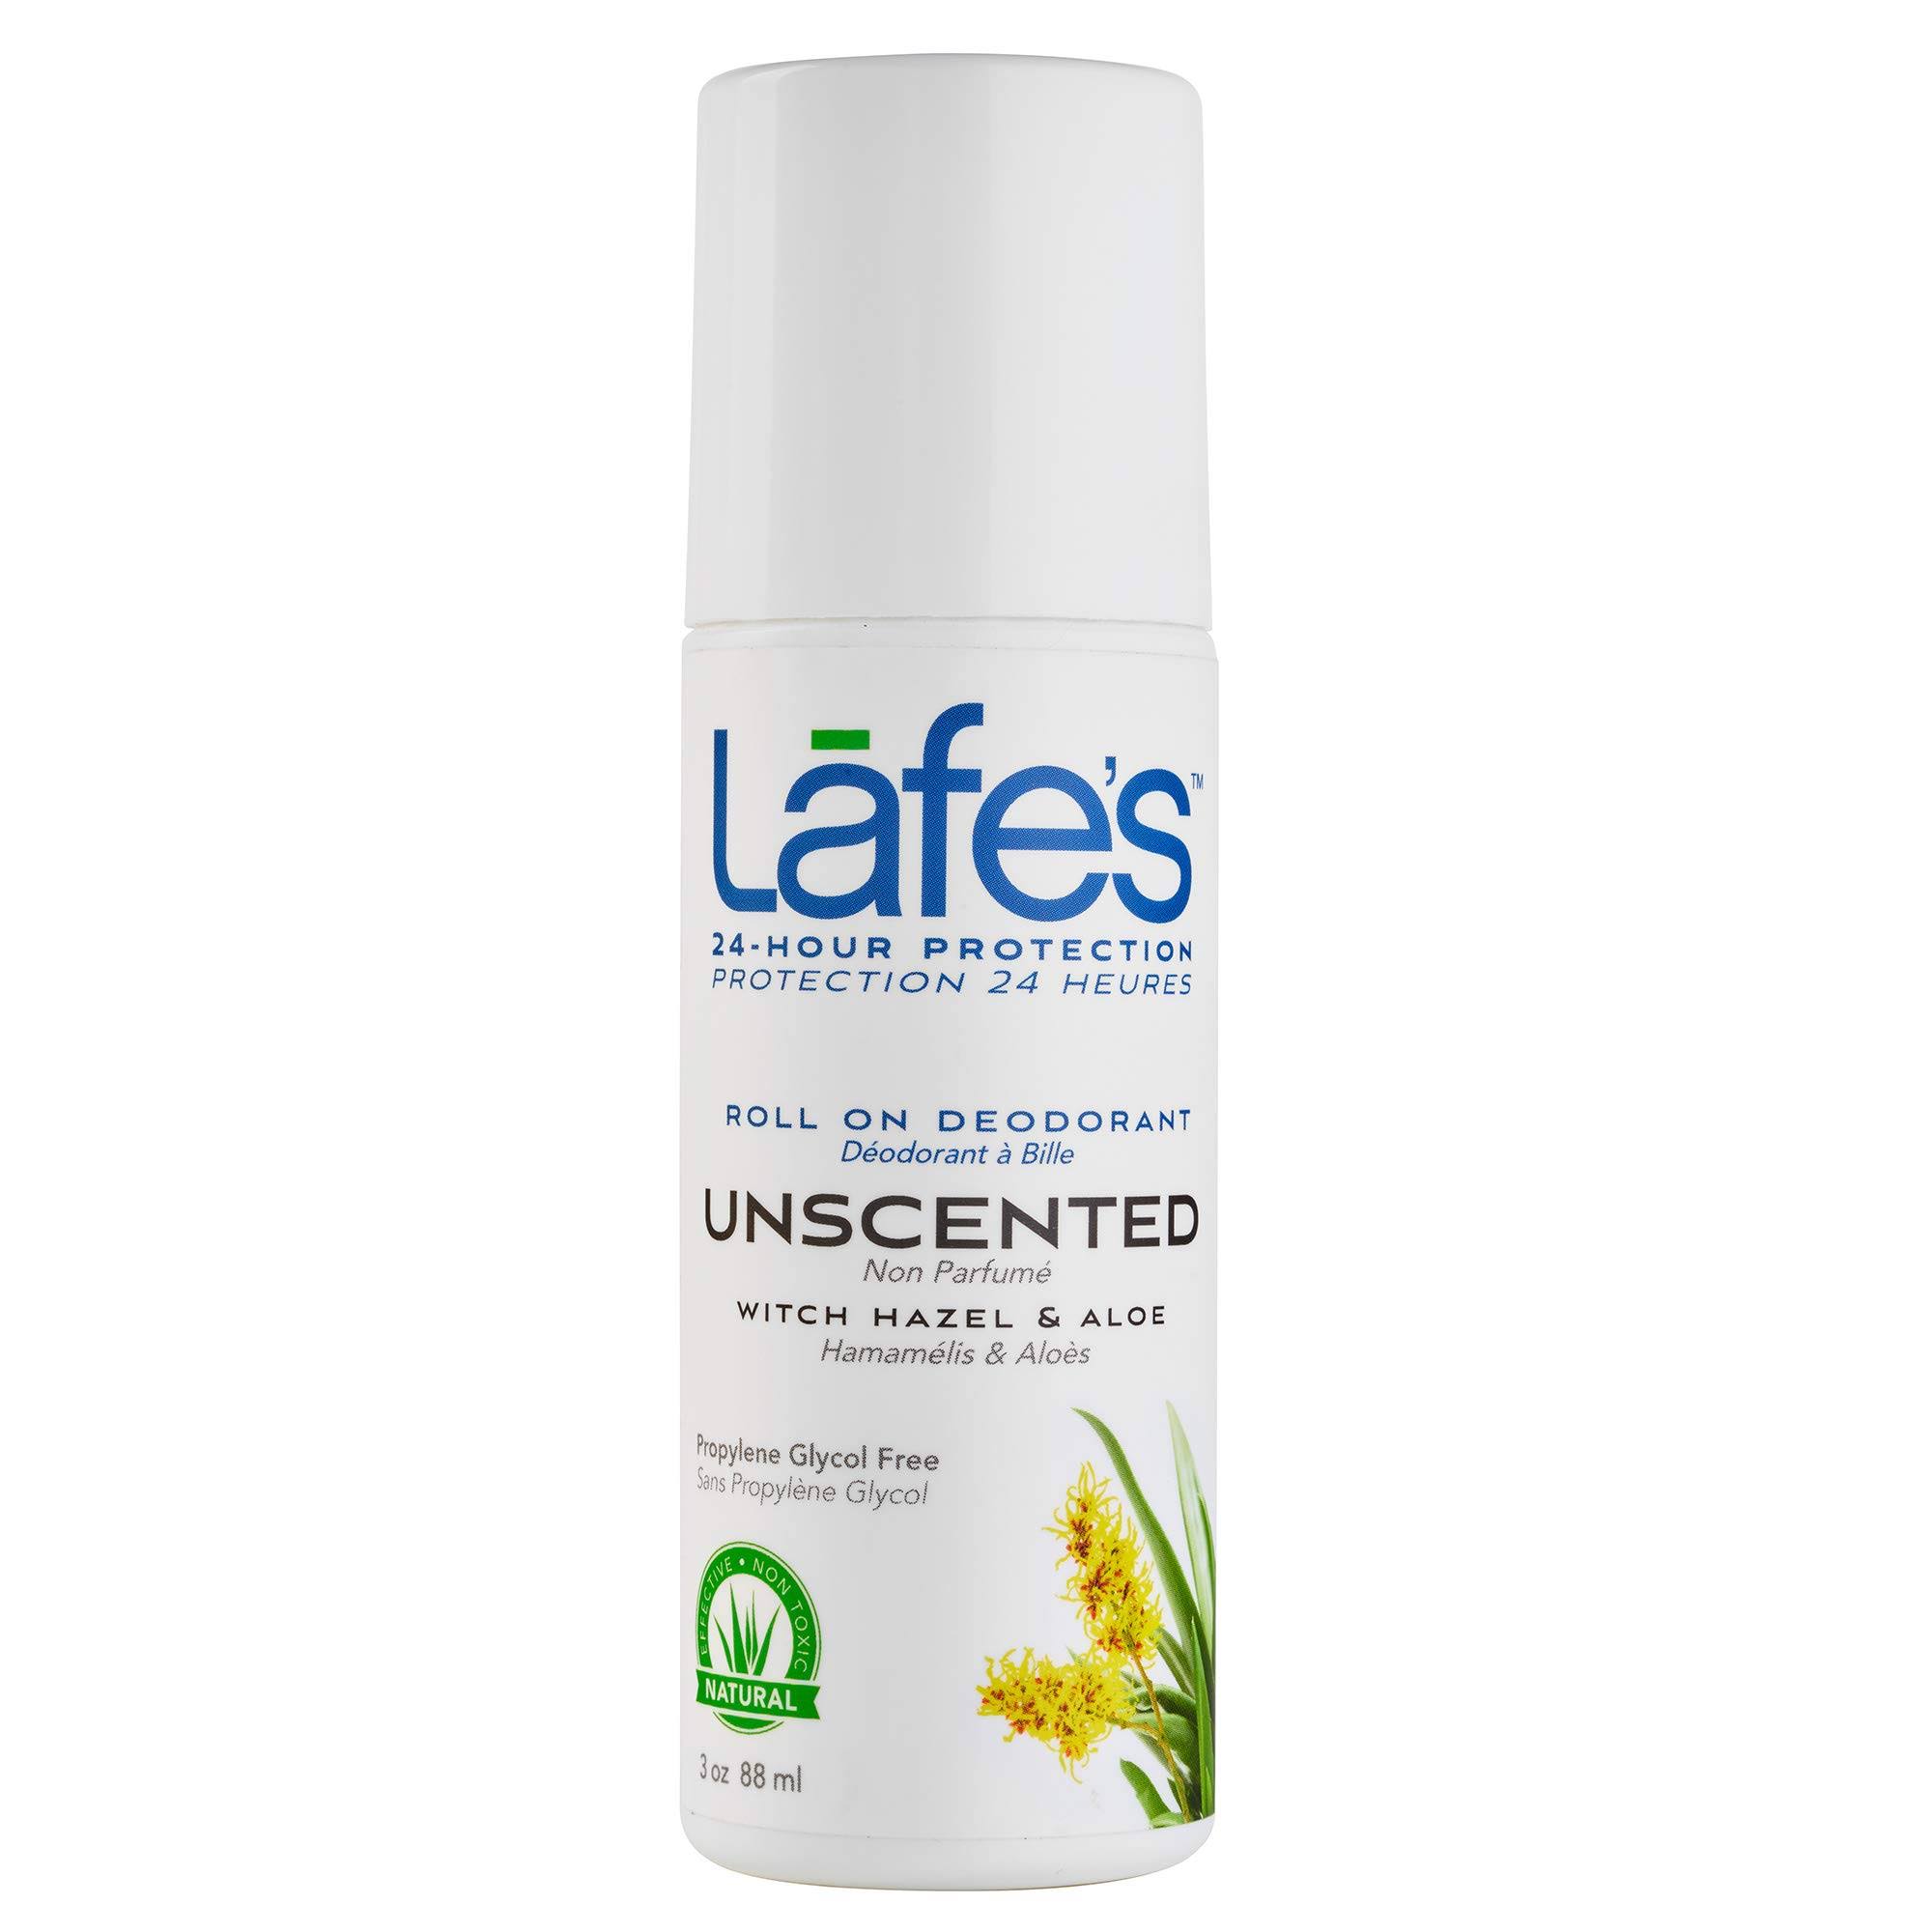 Lafes Natural Roll On Deodorant - Unscented, 89ml